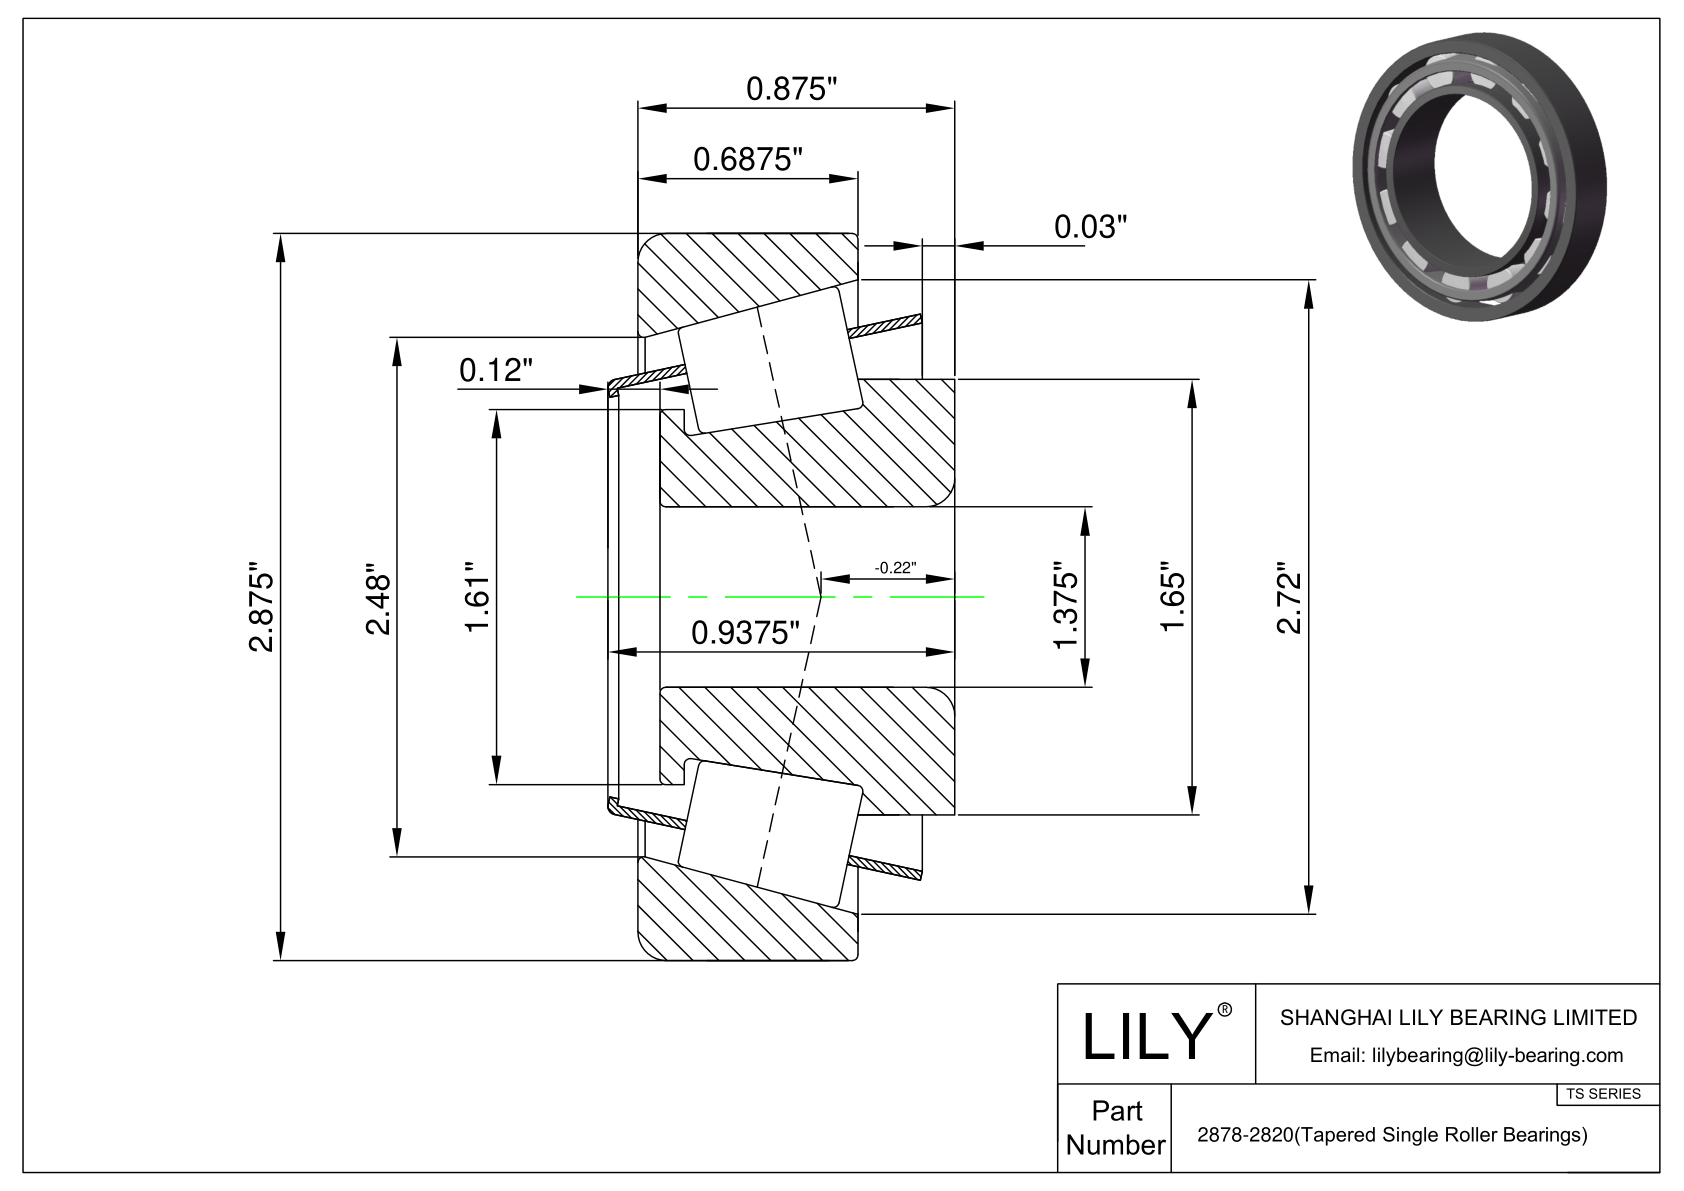 2878-2820 TS (Tapered Single Roller Bearings) (Imperial) cad drawing